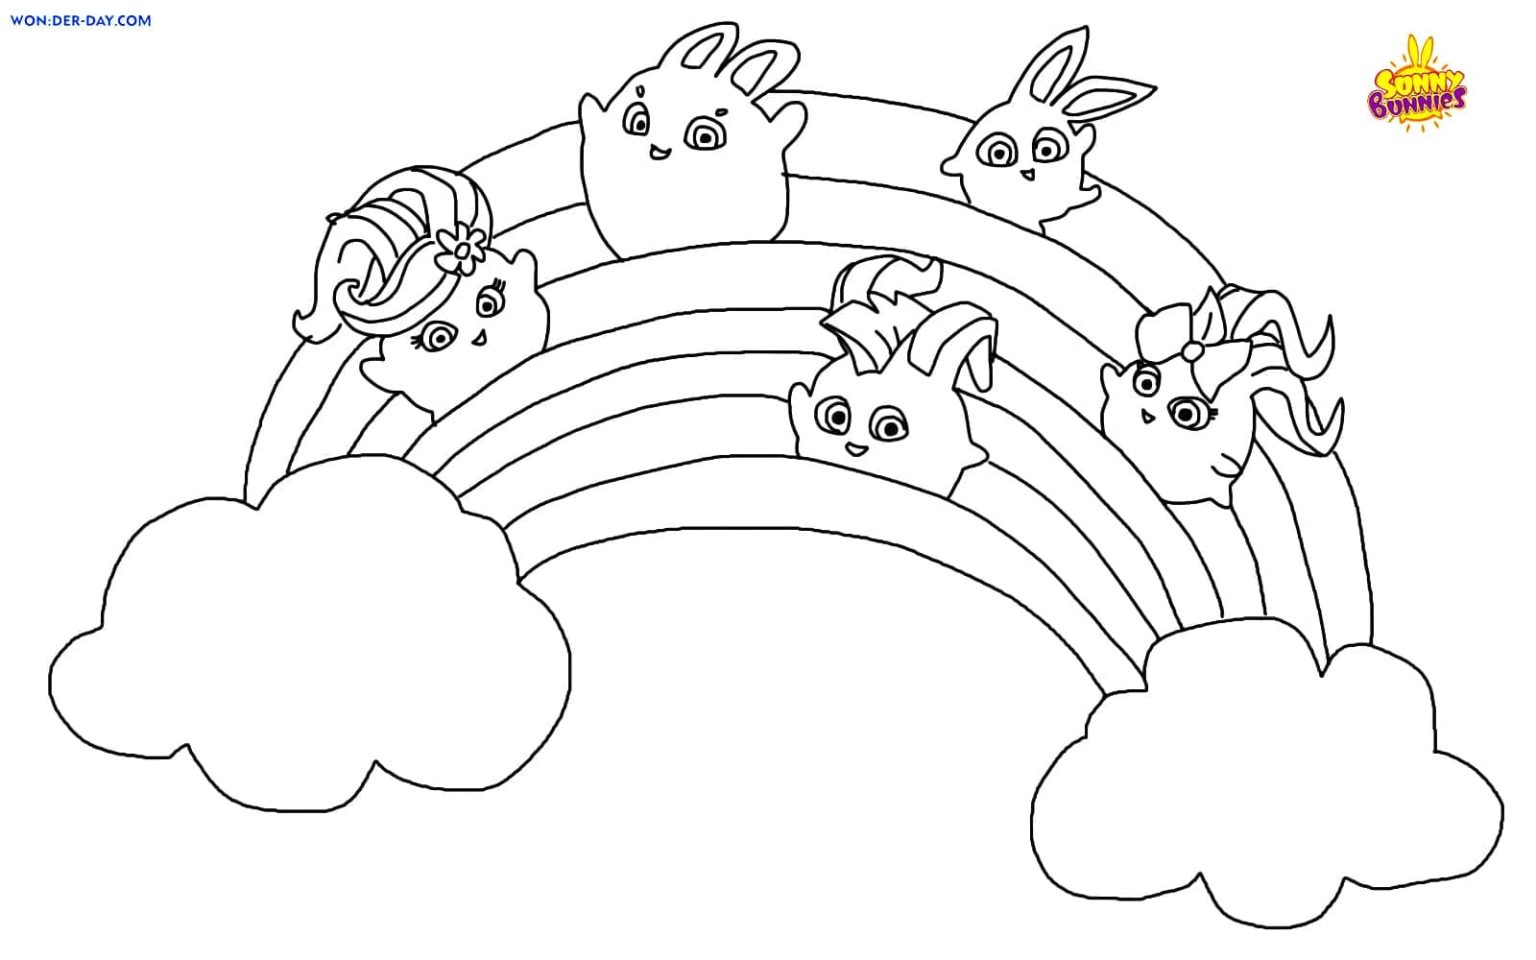 Sunny Bunnies Coloring Pages Printable coloring pages